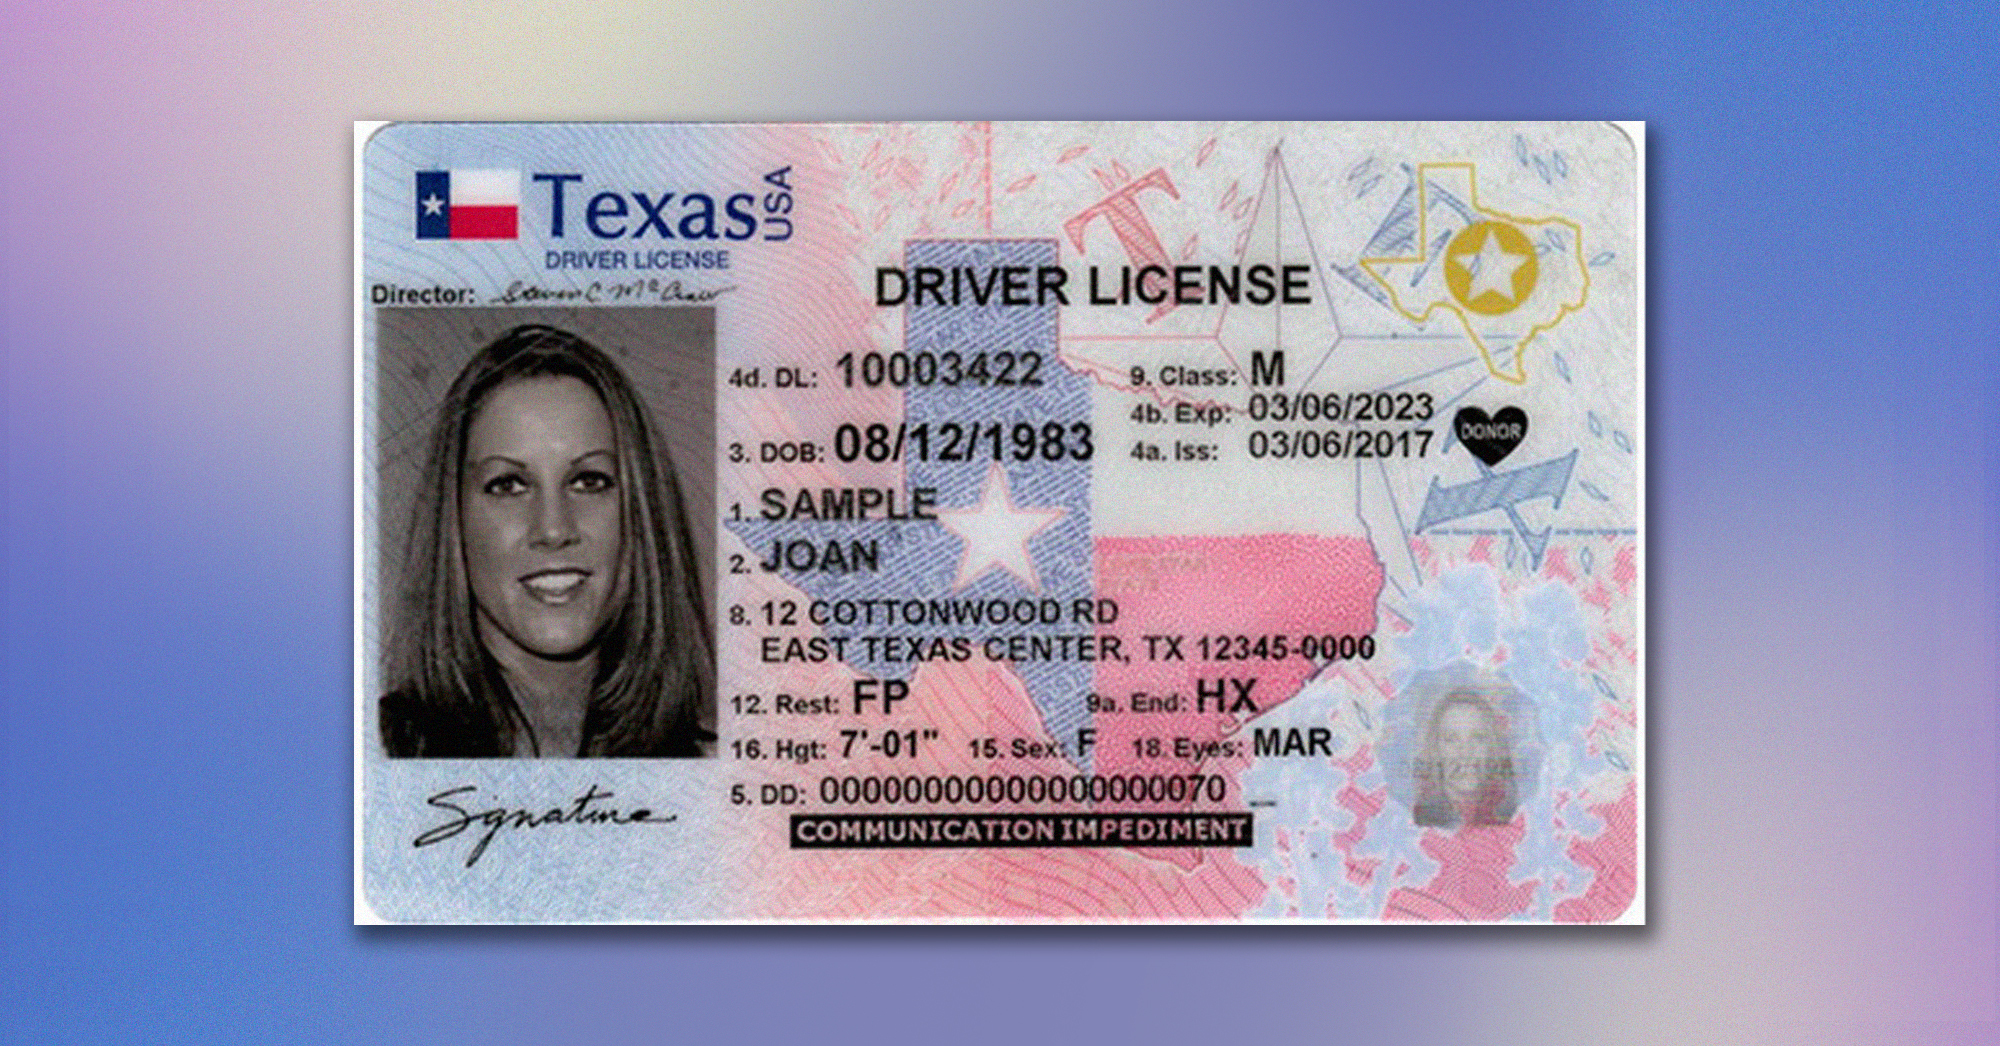 dps driver license replacement